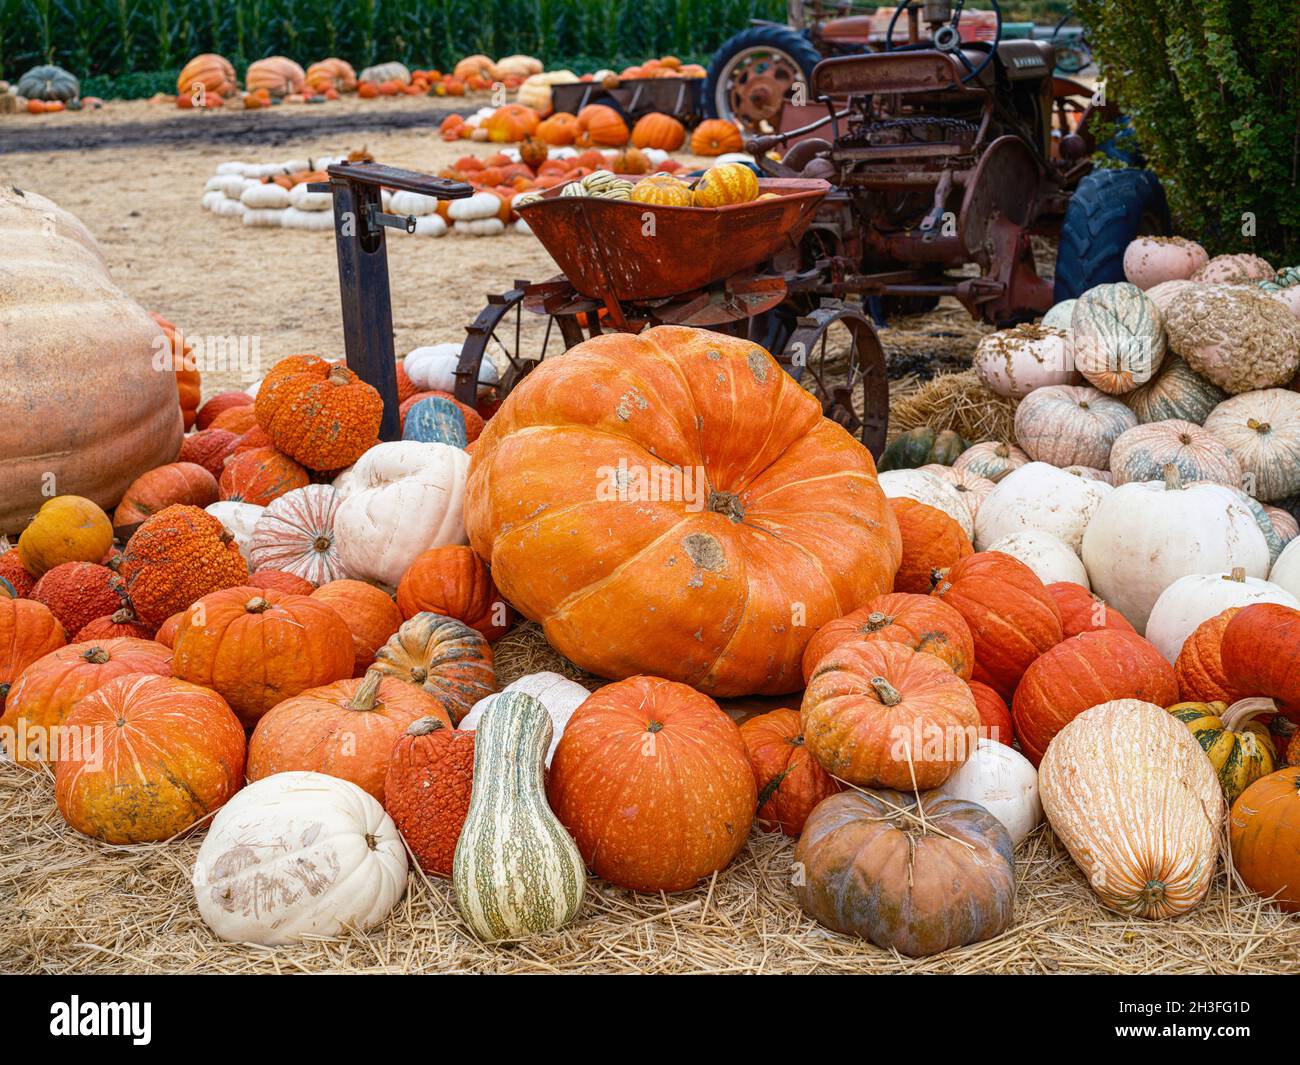 Seasonal autumn joy with a selection of multicolored  and oddly shaped pumpkins Stock Photo